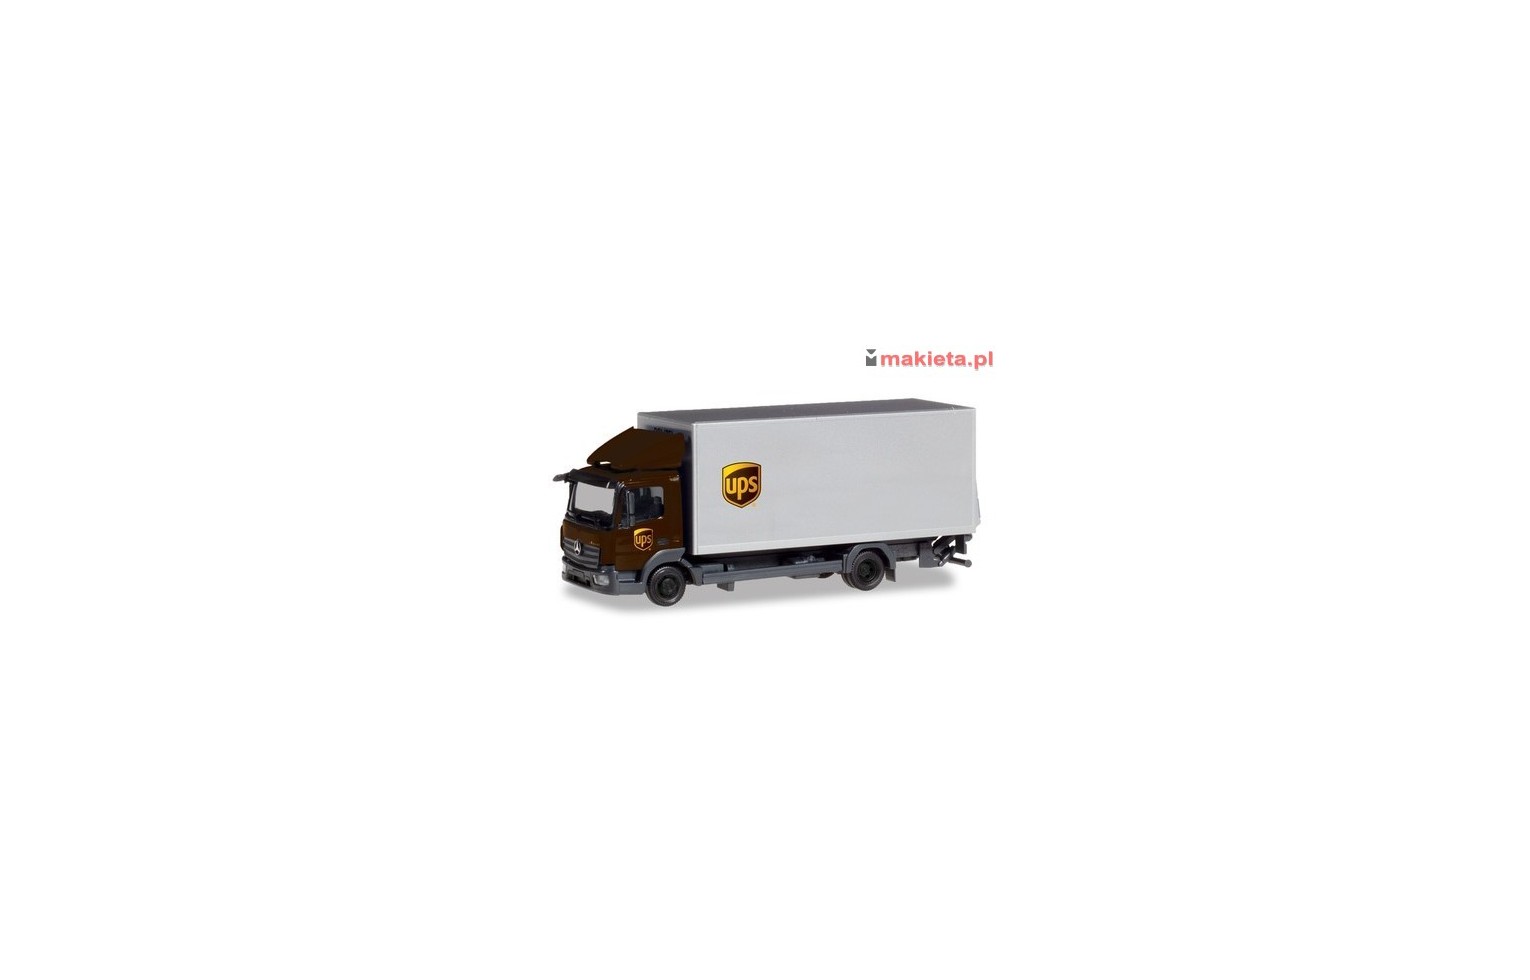 Herpa 310208, Mercedes-Benz Atego box truck with liftgate "UPS", skala H0.